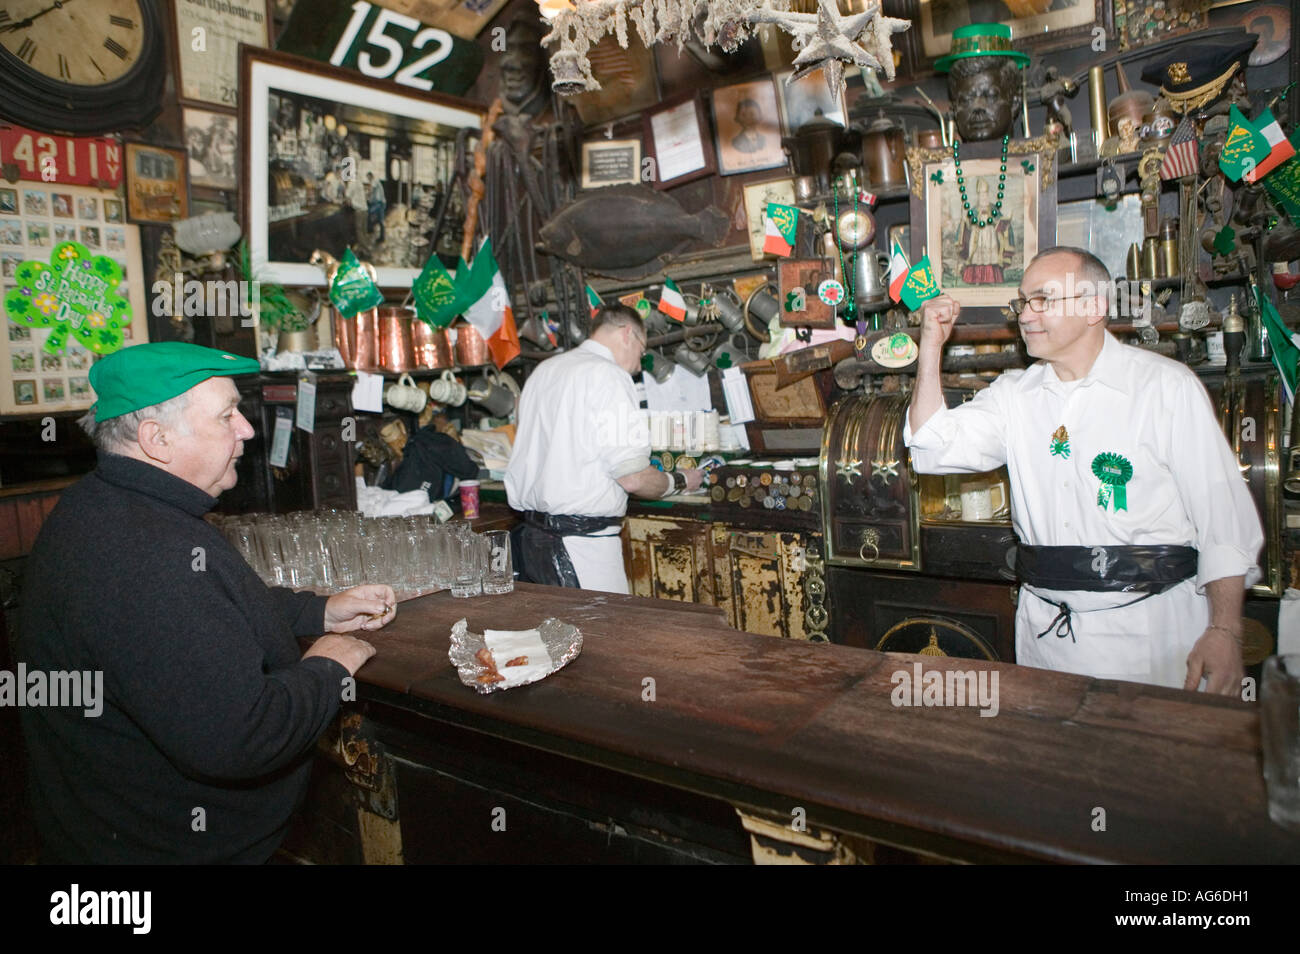 Staff get ready before the 8am opening on St Patrick s day at McSorley s pub in New York City USA March 2006 Stock Photo